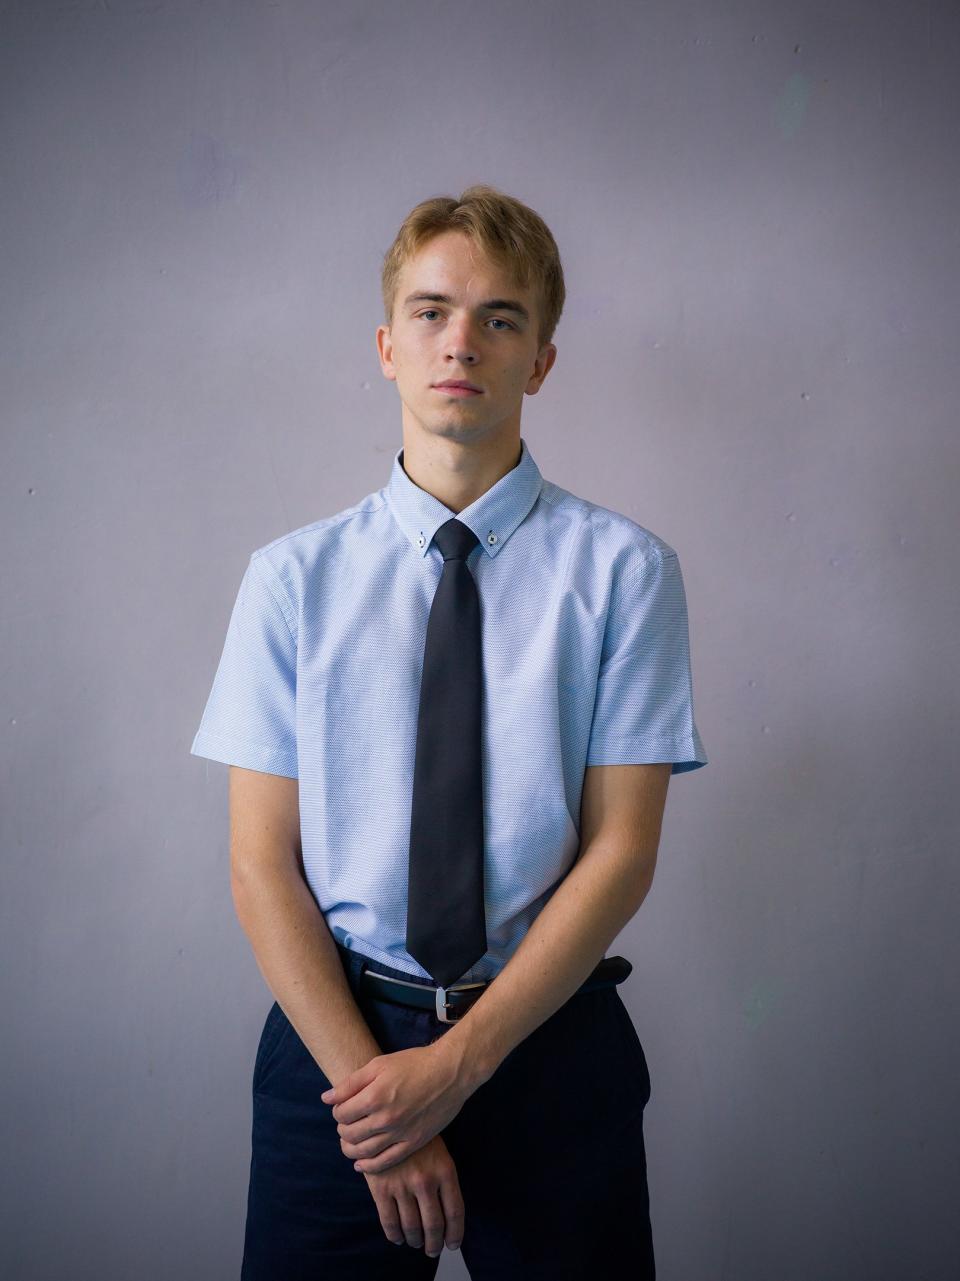 What Artur Samarin pulled off at a school in small-town Pennsylvania is one of the boldest hoaxes of our time.